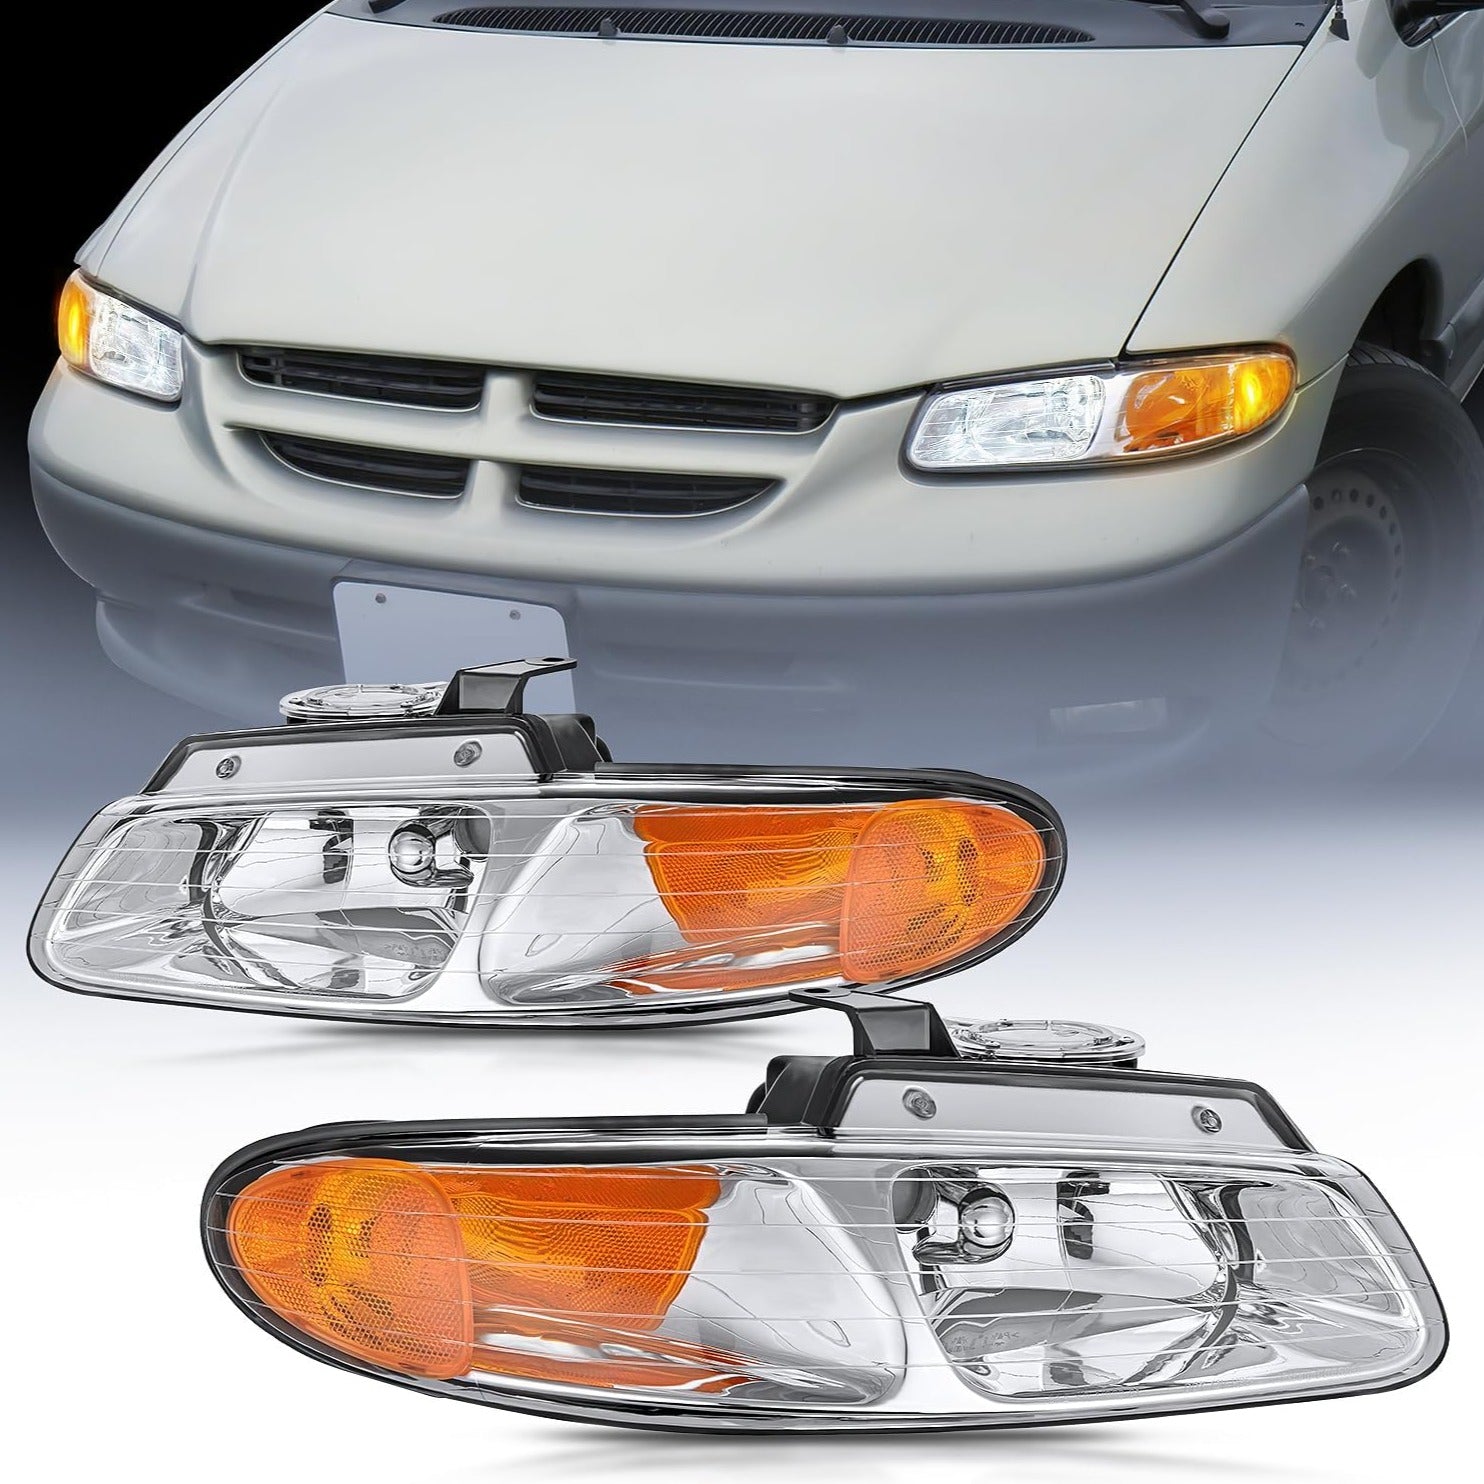 1996-1999 Chrysler Town & Country Dodge Grand Caravan Plymouth Grand Voyager Headlight Assembly Chrome Case Amber Reflector Nilight